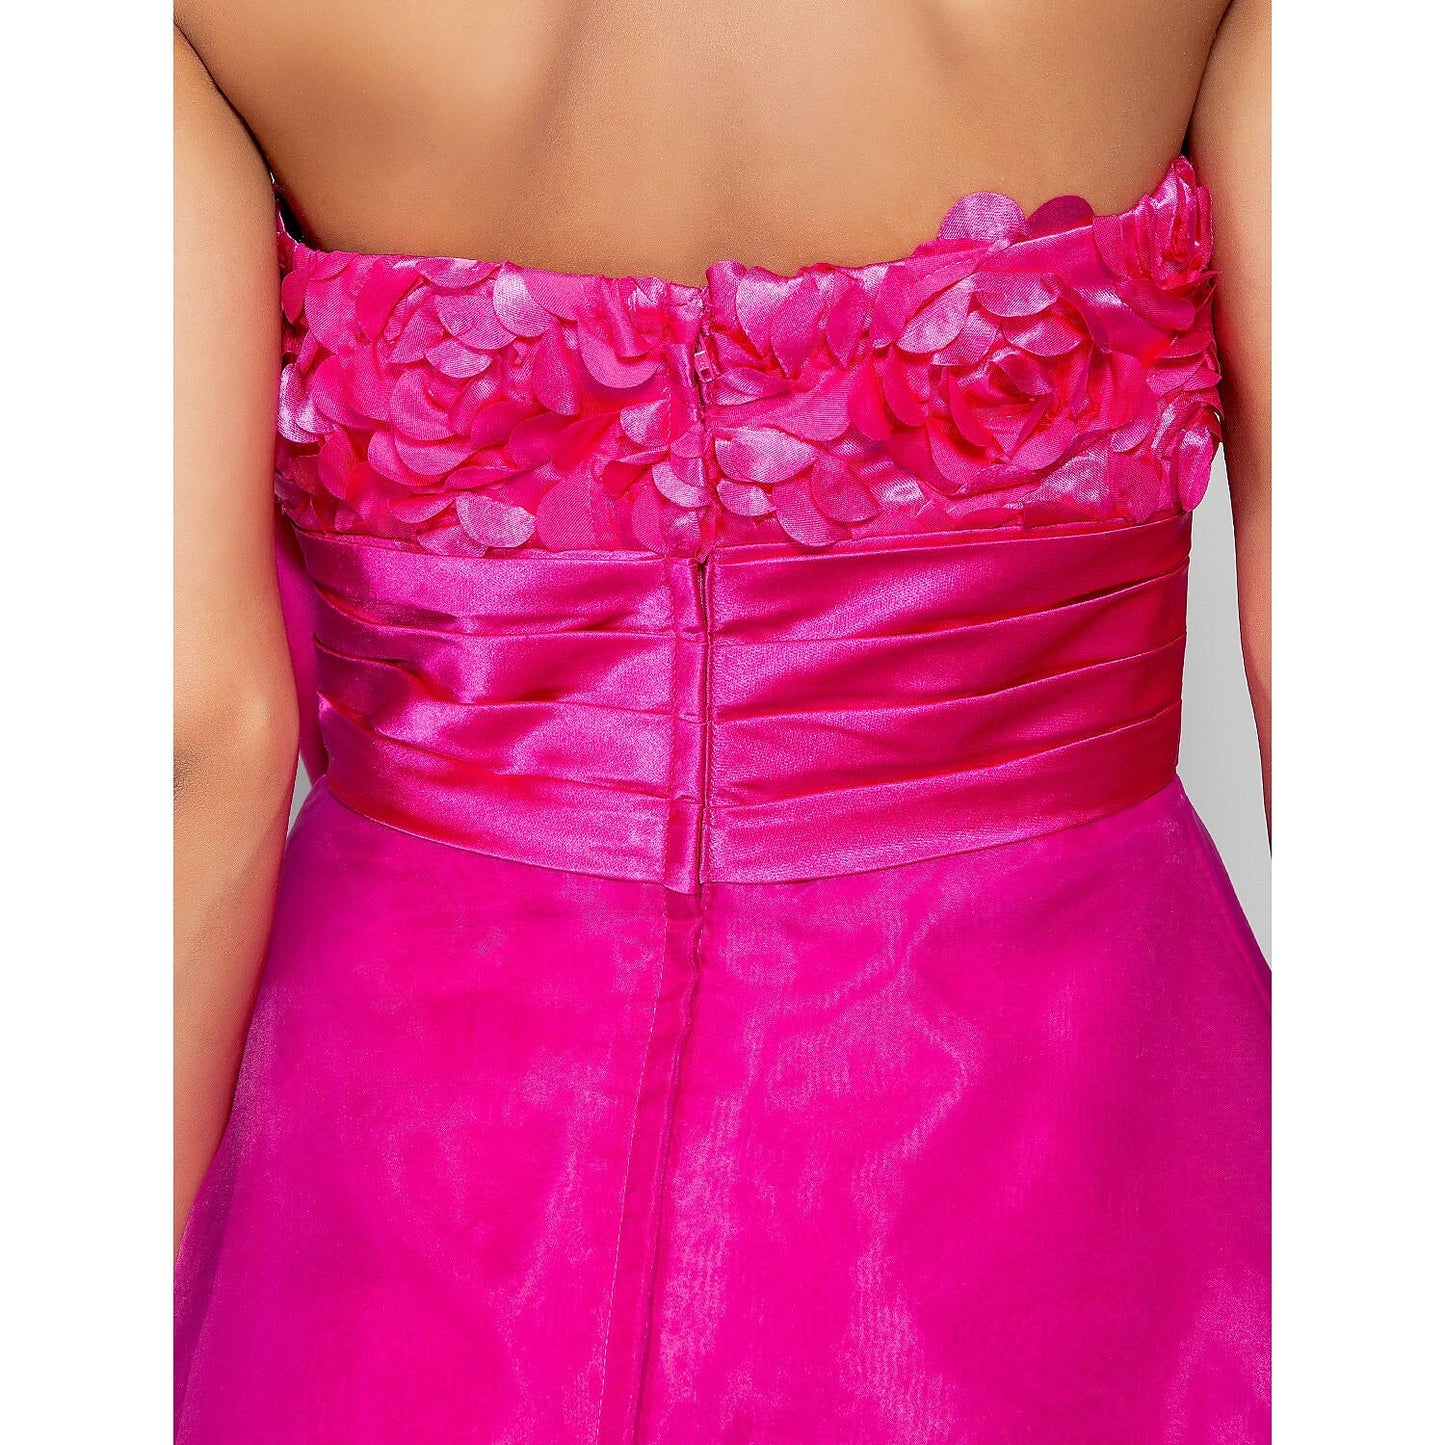 Open Back Dress Cocktail Party Knee Length Sleeveless Organza Sash Ribbon Bow(s) Ruched